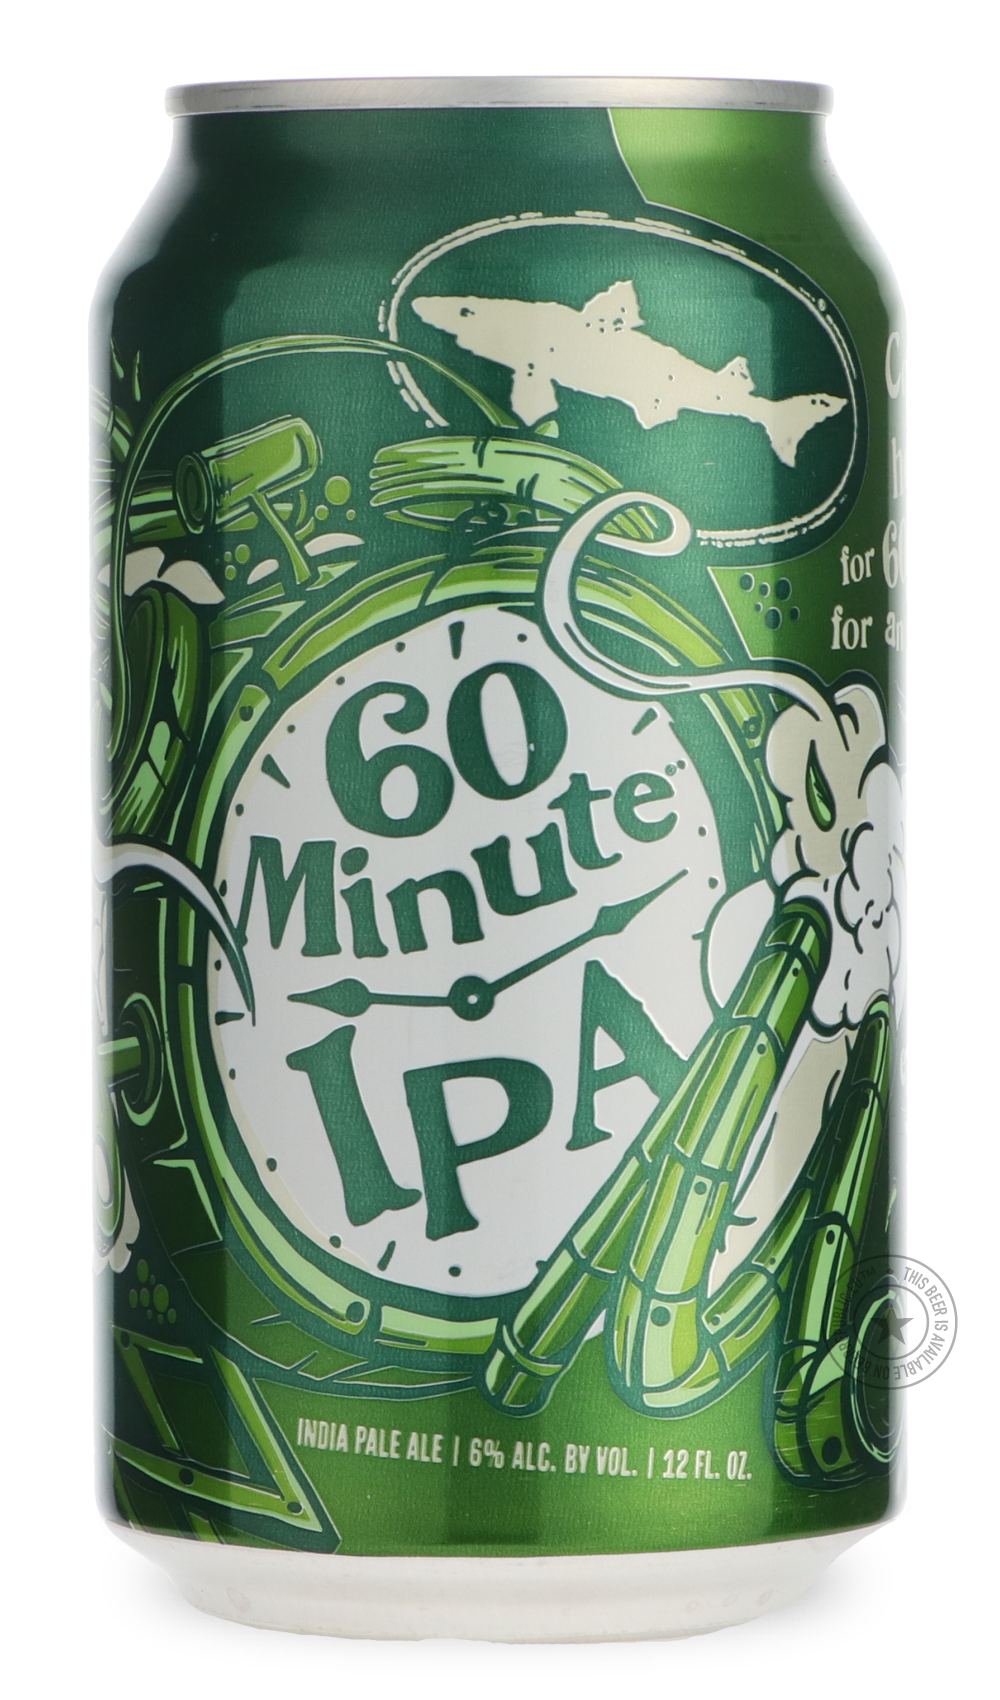 -Dogfish Head- 60 Minute-IPA- Only @ Beer Republic - The best online beer store for American & Canadian craft beer - Buy beer online from the USA and Canada - Bier online kopen - Amerikaans bier kopen - Craft beer store - Craft beer kopen - Amerikanisch bier kaufen - Bier online kaufen - Acheter biere online - IPA - Stout - Porter - New England IPA - Hazy IPA - Imperial Stout - Barrel Aged - Barrel Aged Imperial Stout - Brown - Dark beer - Blond - Blonde - Pilsner - Lager - Wheat - Weizen - Amber - Barley W